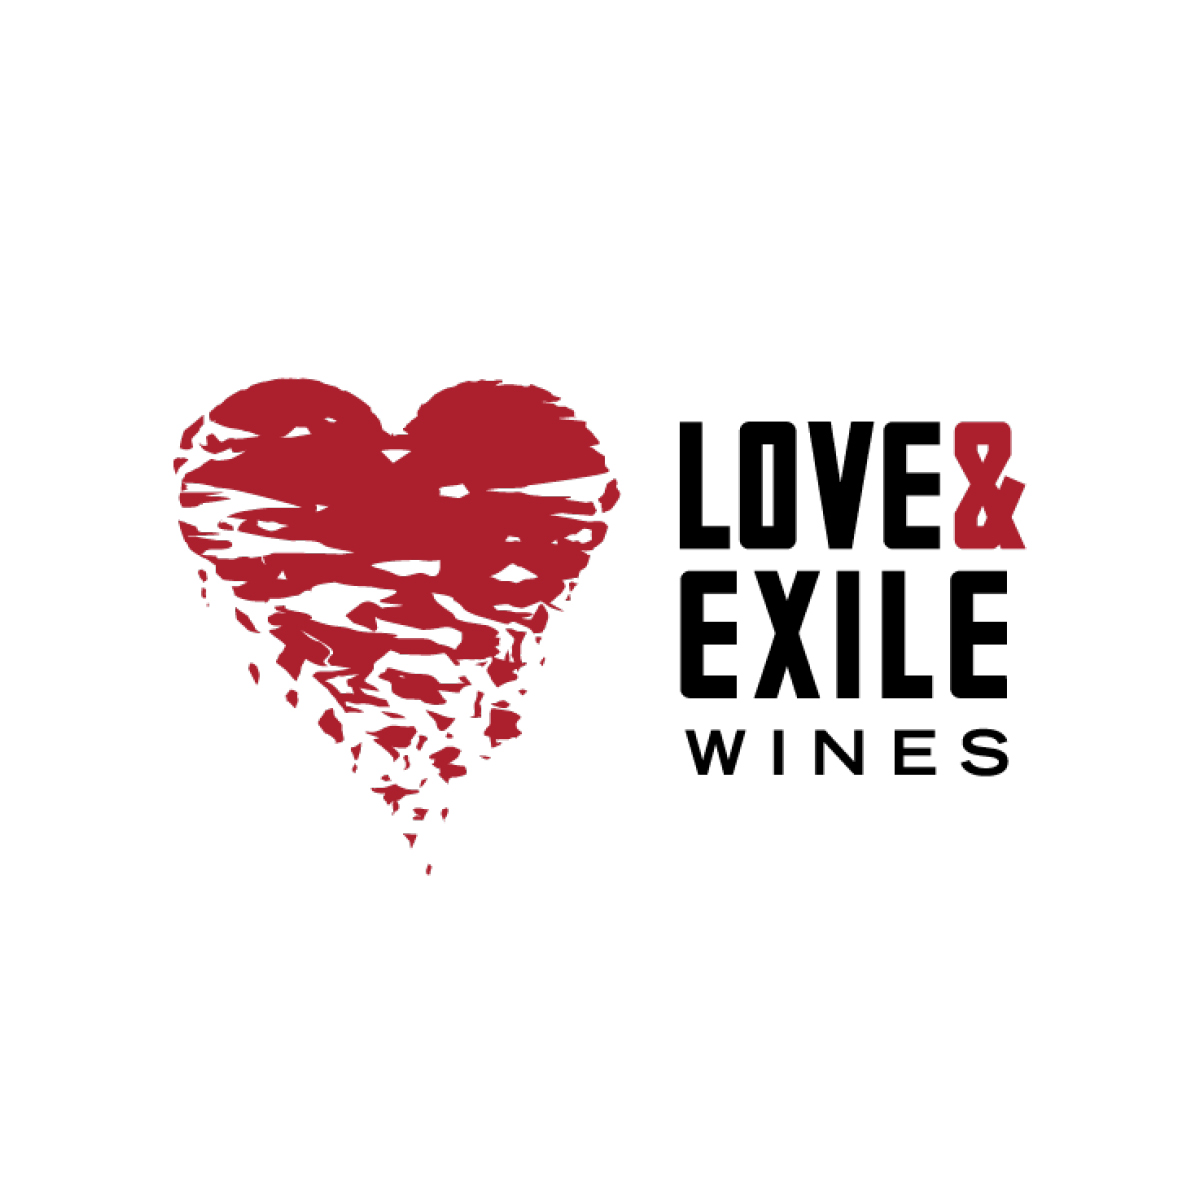 Love & Exile Wines